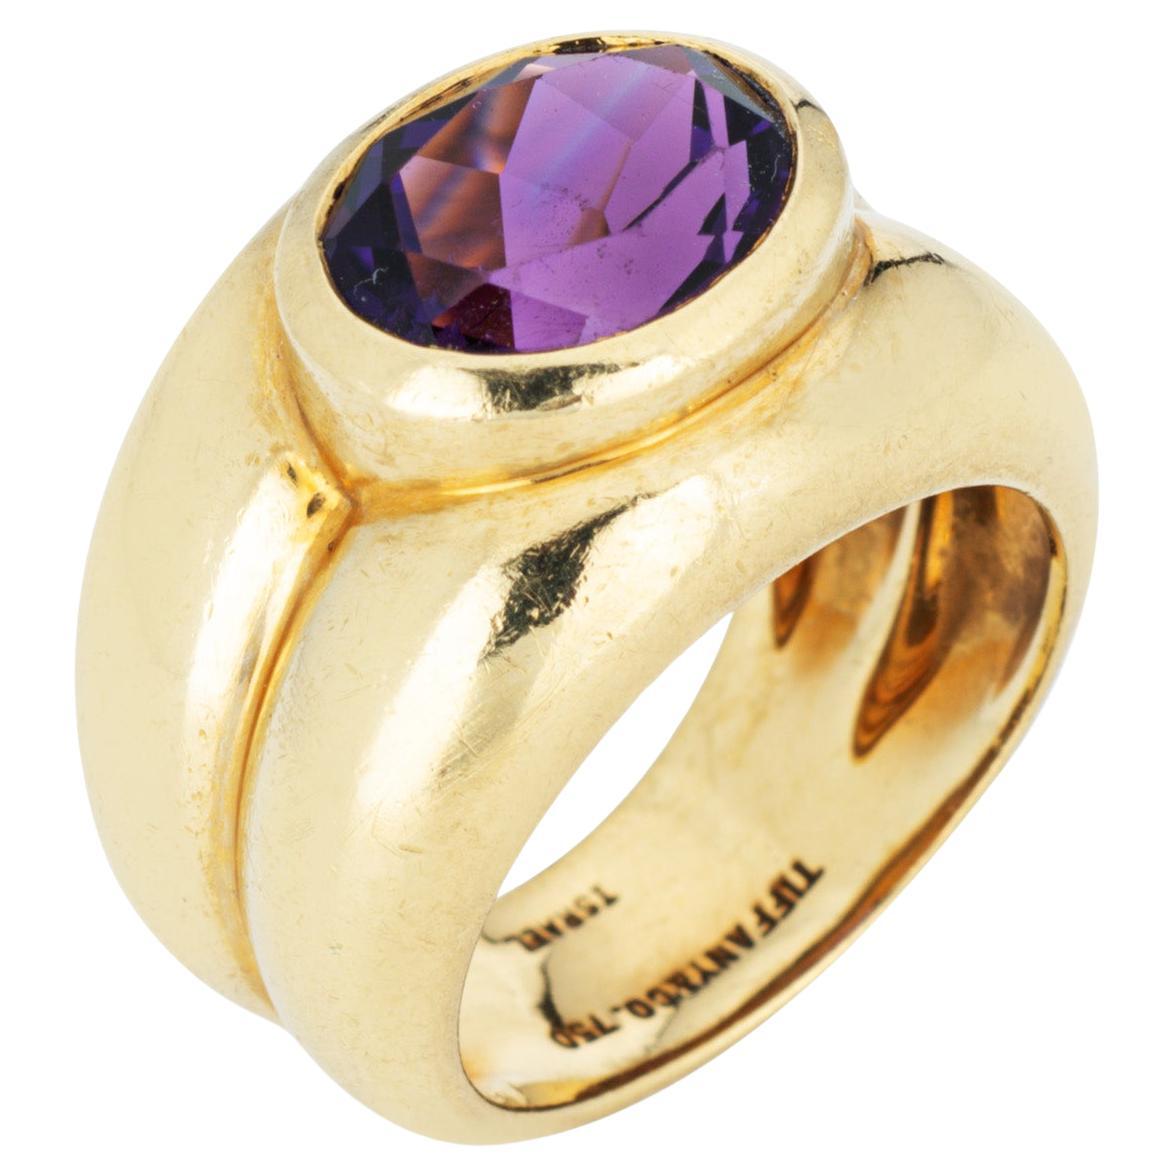 Vintage Tiffany & Co Amethyst Ring 18k Yellow Gold Sz 5.5 Band Signed Jewelry For Sale